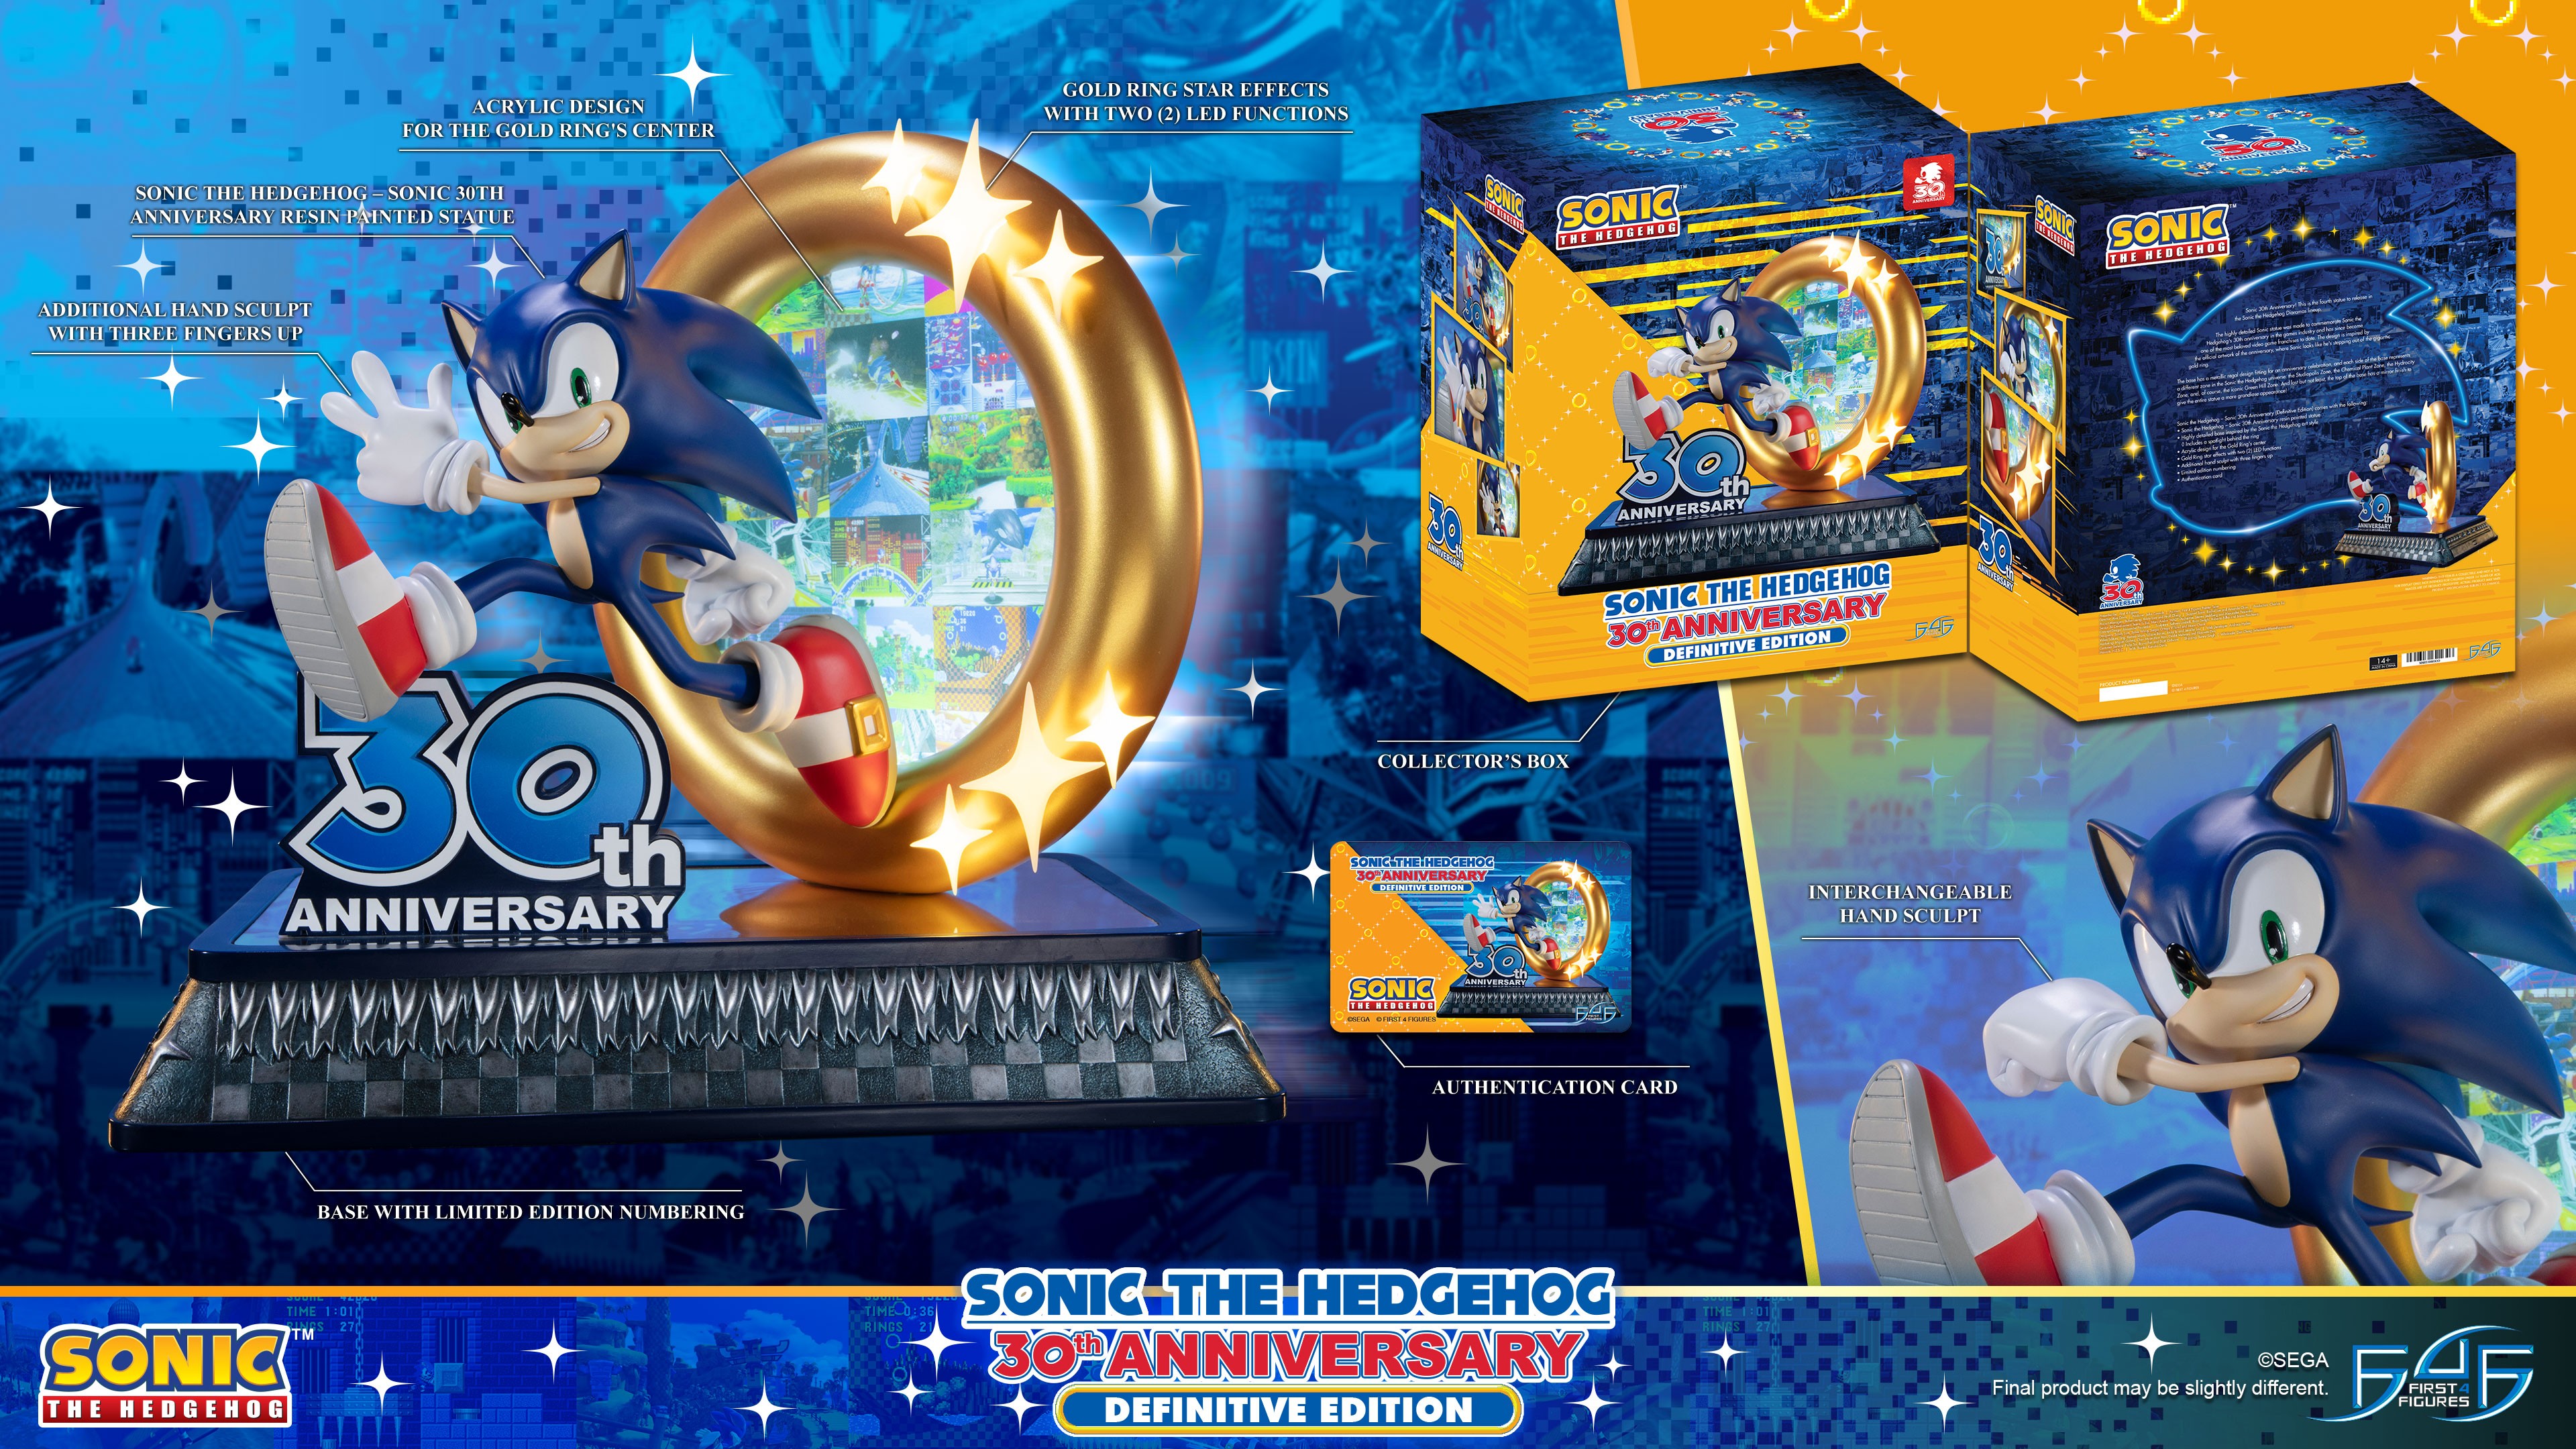 Sonic Adventure 2 - Shadow the Hedgehog - Sonic the Hedgehog Modern (2) -  Exclusive (First 4 Figures)